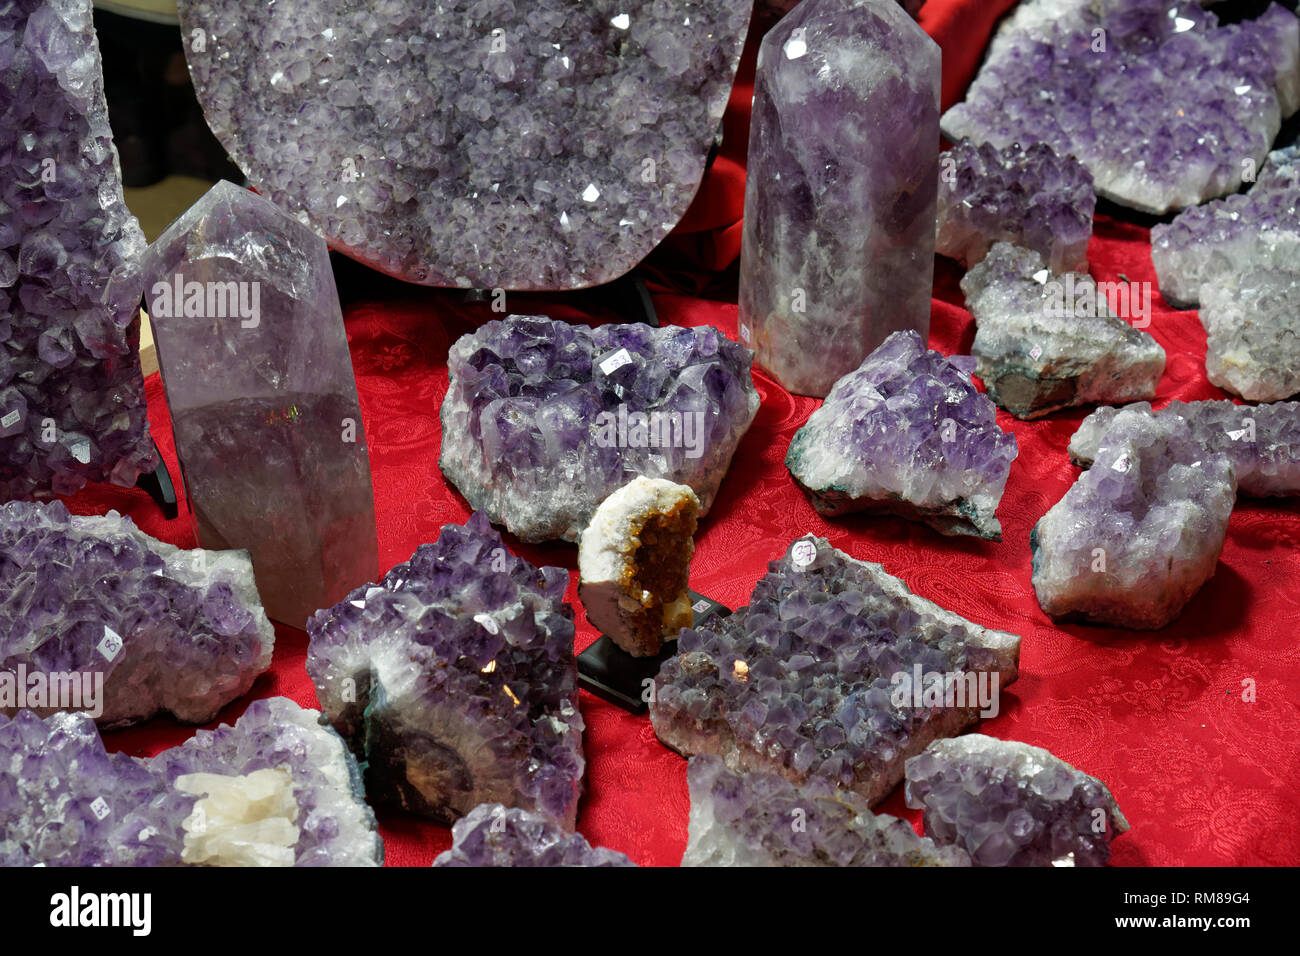 Close-up of violet amethyst crystals on a table Stock Photo